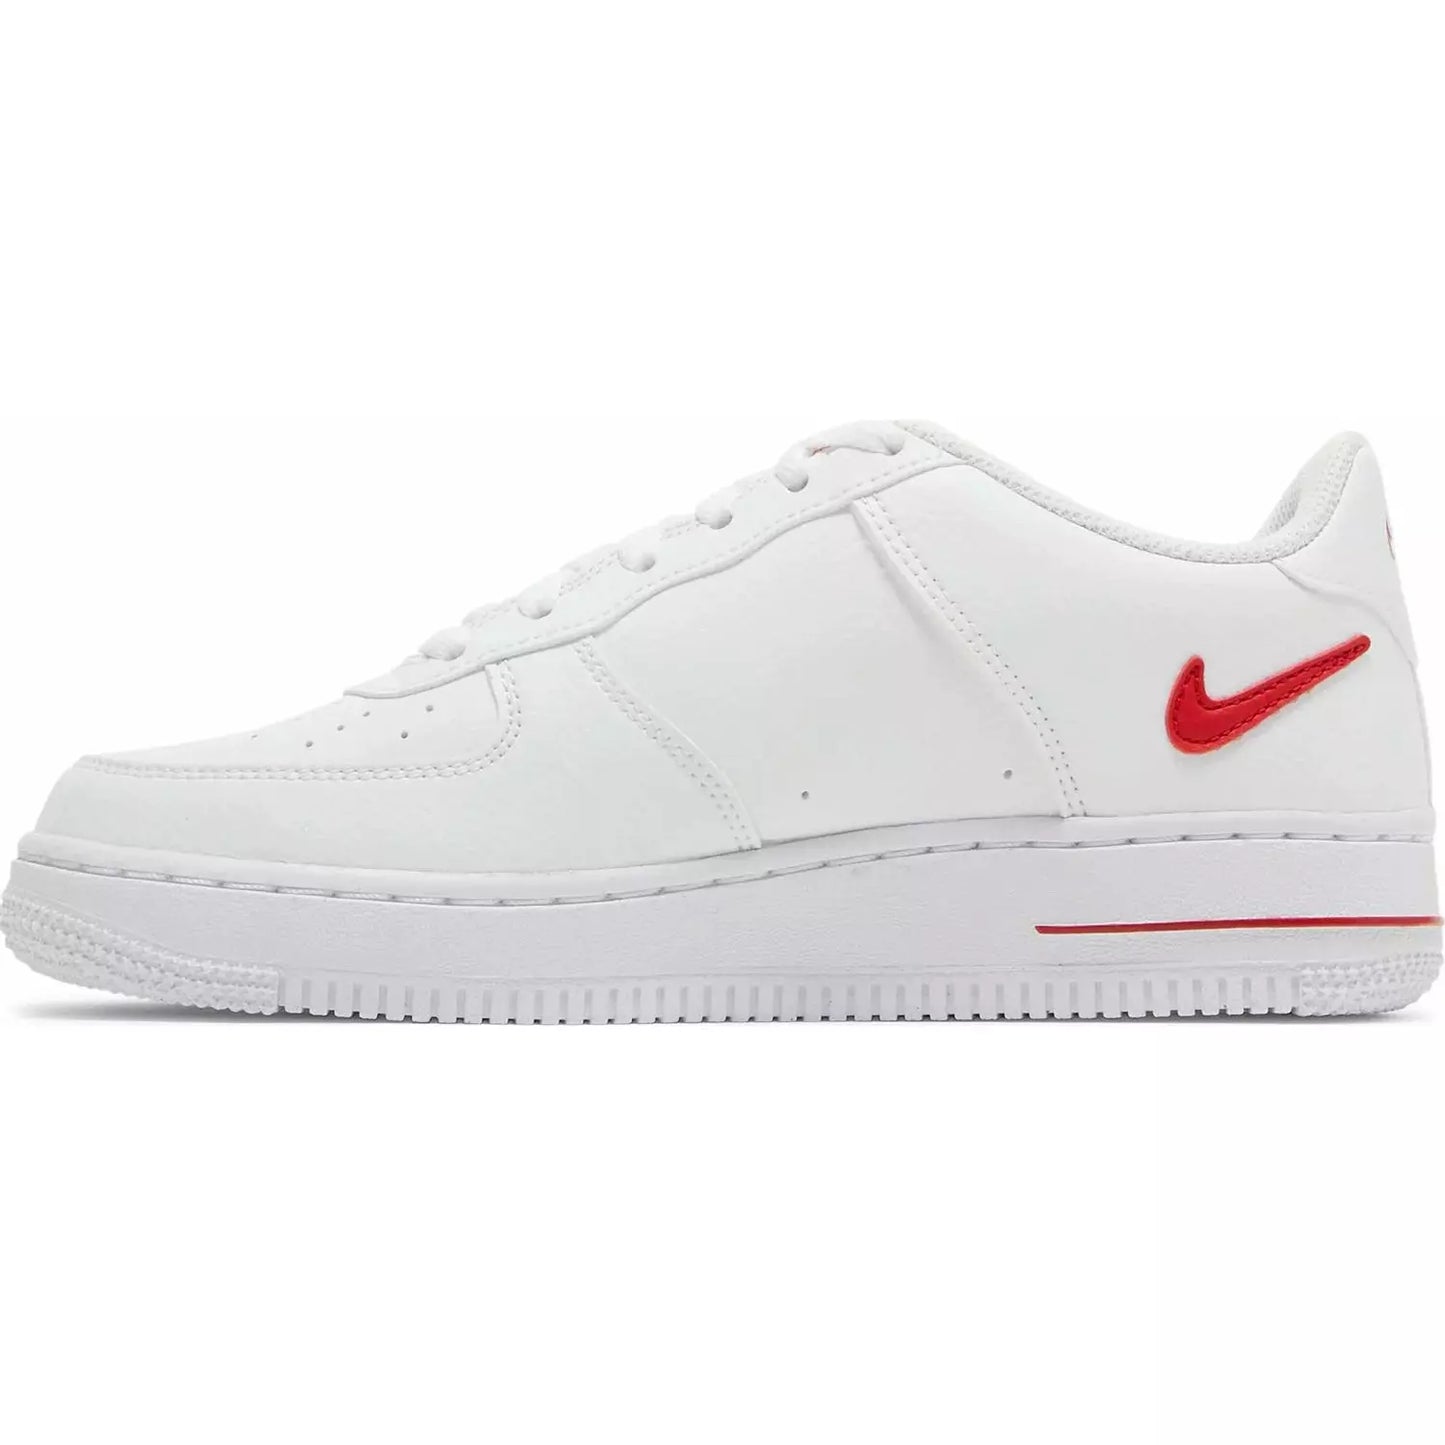 Air Force 1 GS Big Kid's 'Cut-Out Swoosh - White University Red' DR7970-100